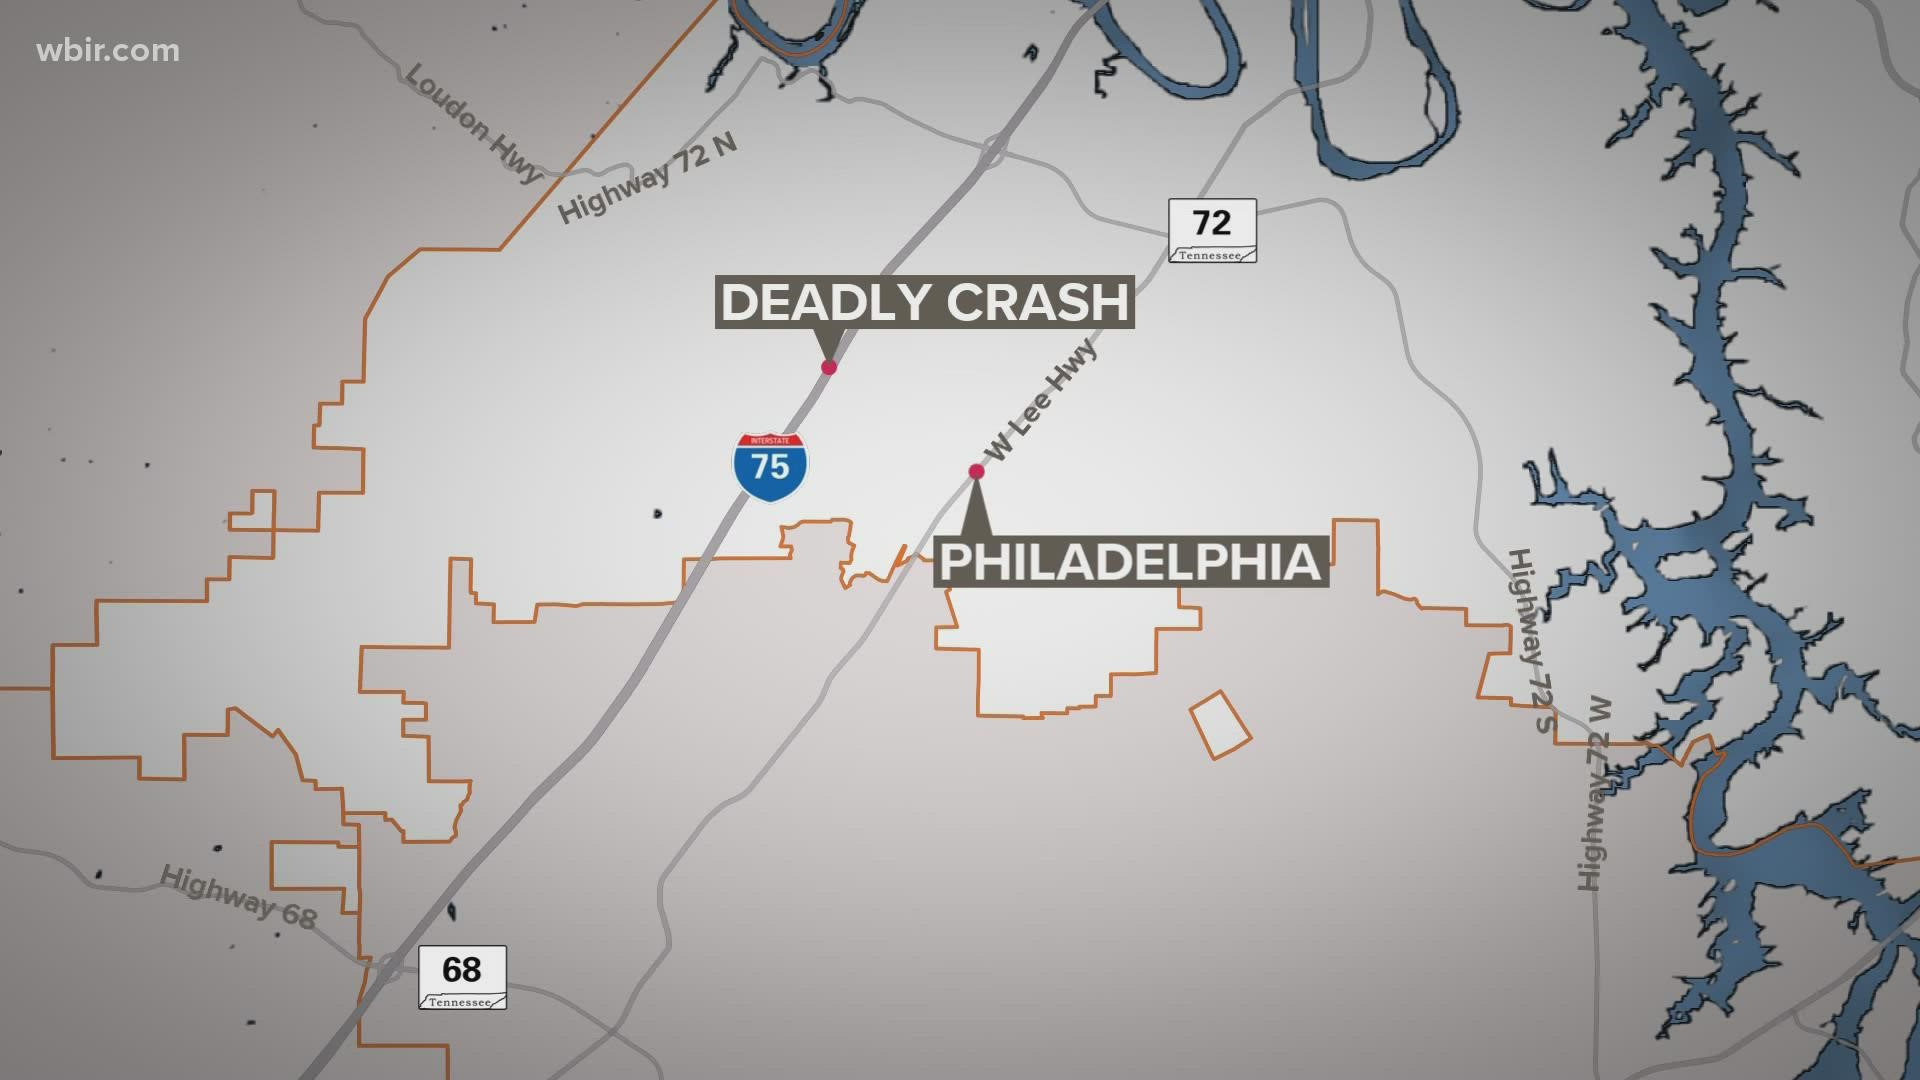 The Loudon County Sheriff's Office deputies and state troopers are investigating the cause of the crash.